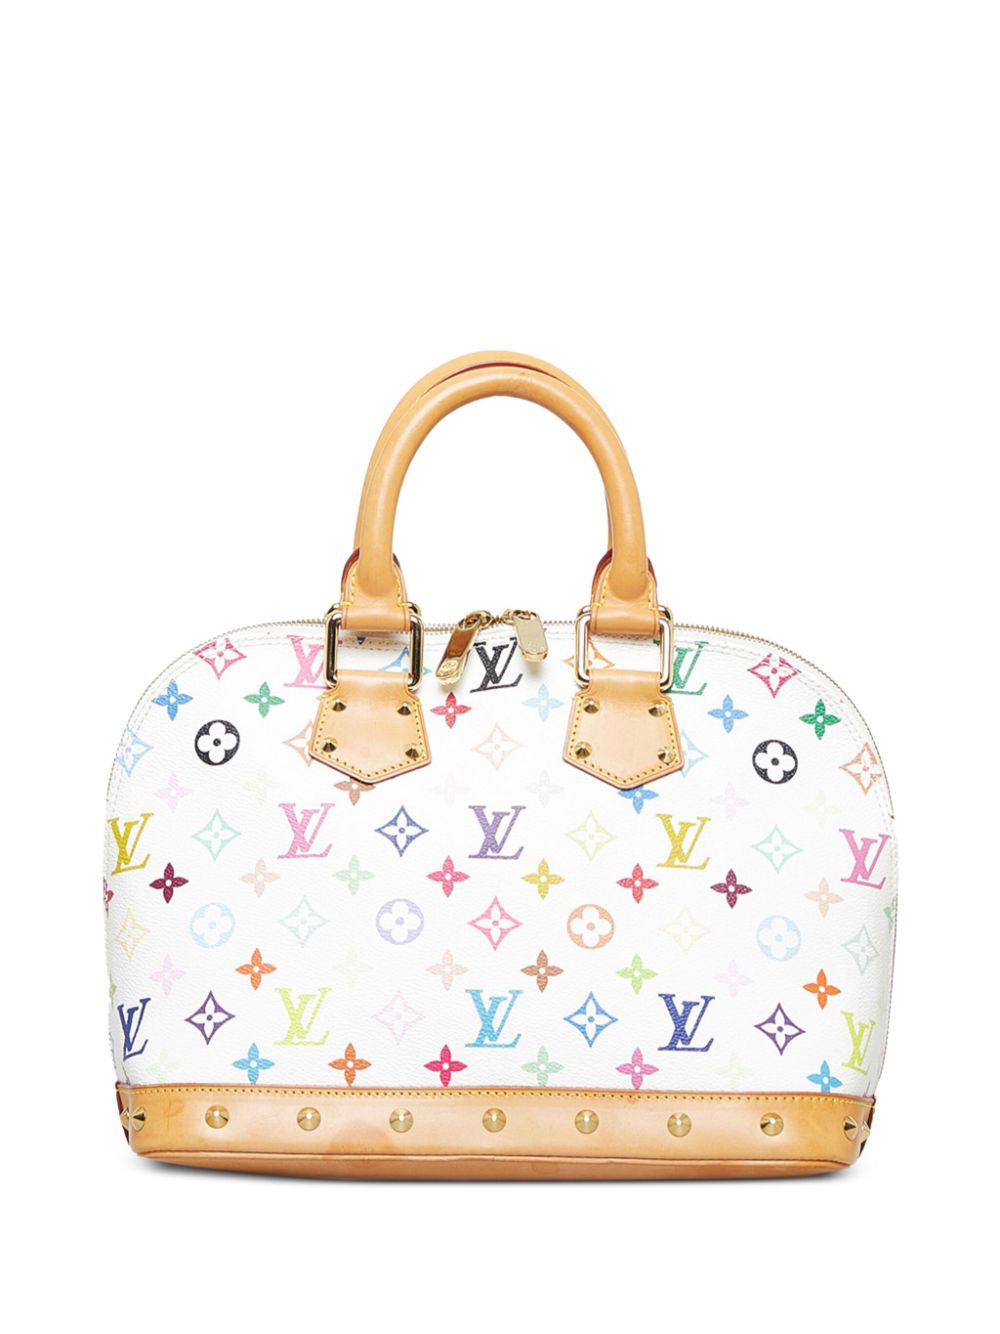 Louis Vuitton 2003 pre-owned Alma PM tote bag - Wit